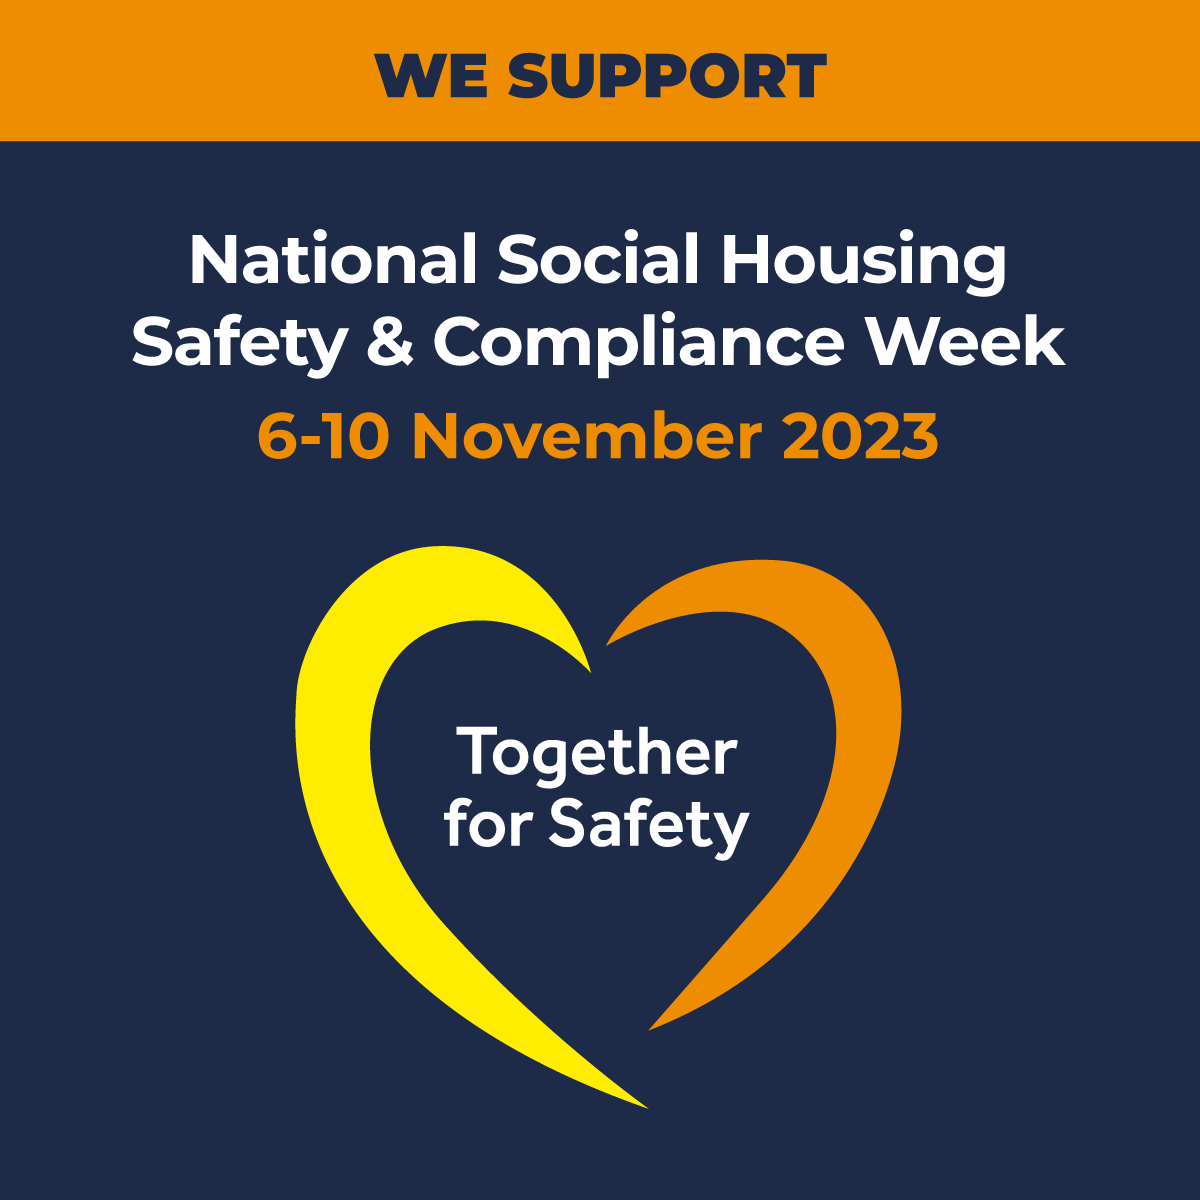 Keeping our residents & their homes safe is our top priority, and that's why we always support National Social Housing Safety & Compliance Week (NSHSCW). #NSHSCW is in its third year now, and this year has launched its #TogetherForSafety message. Read more ow.ly/zR5h50Q4EgH